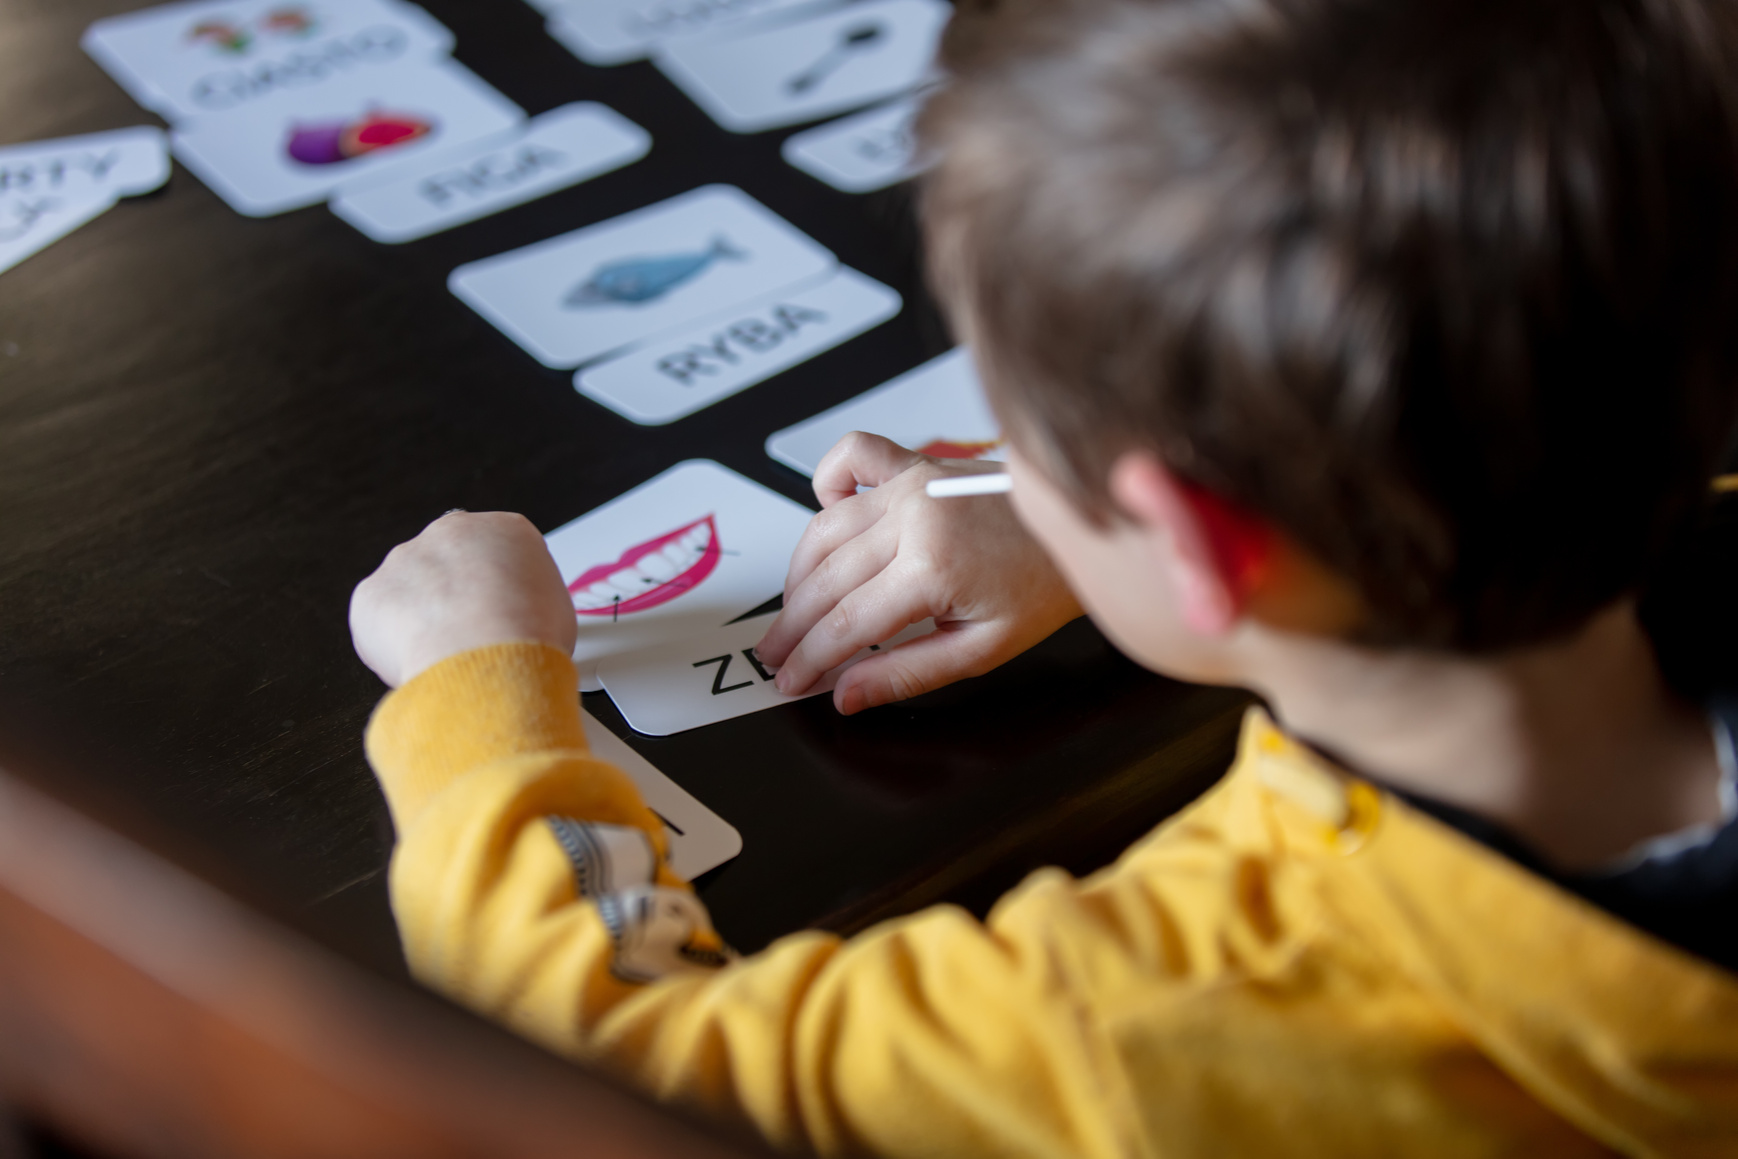 Little Boy Learns Words from Cards under the ABA Therapy Program